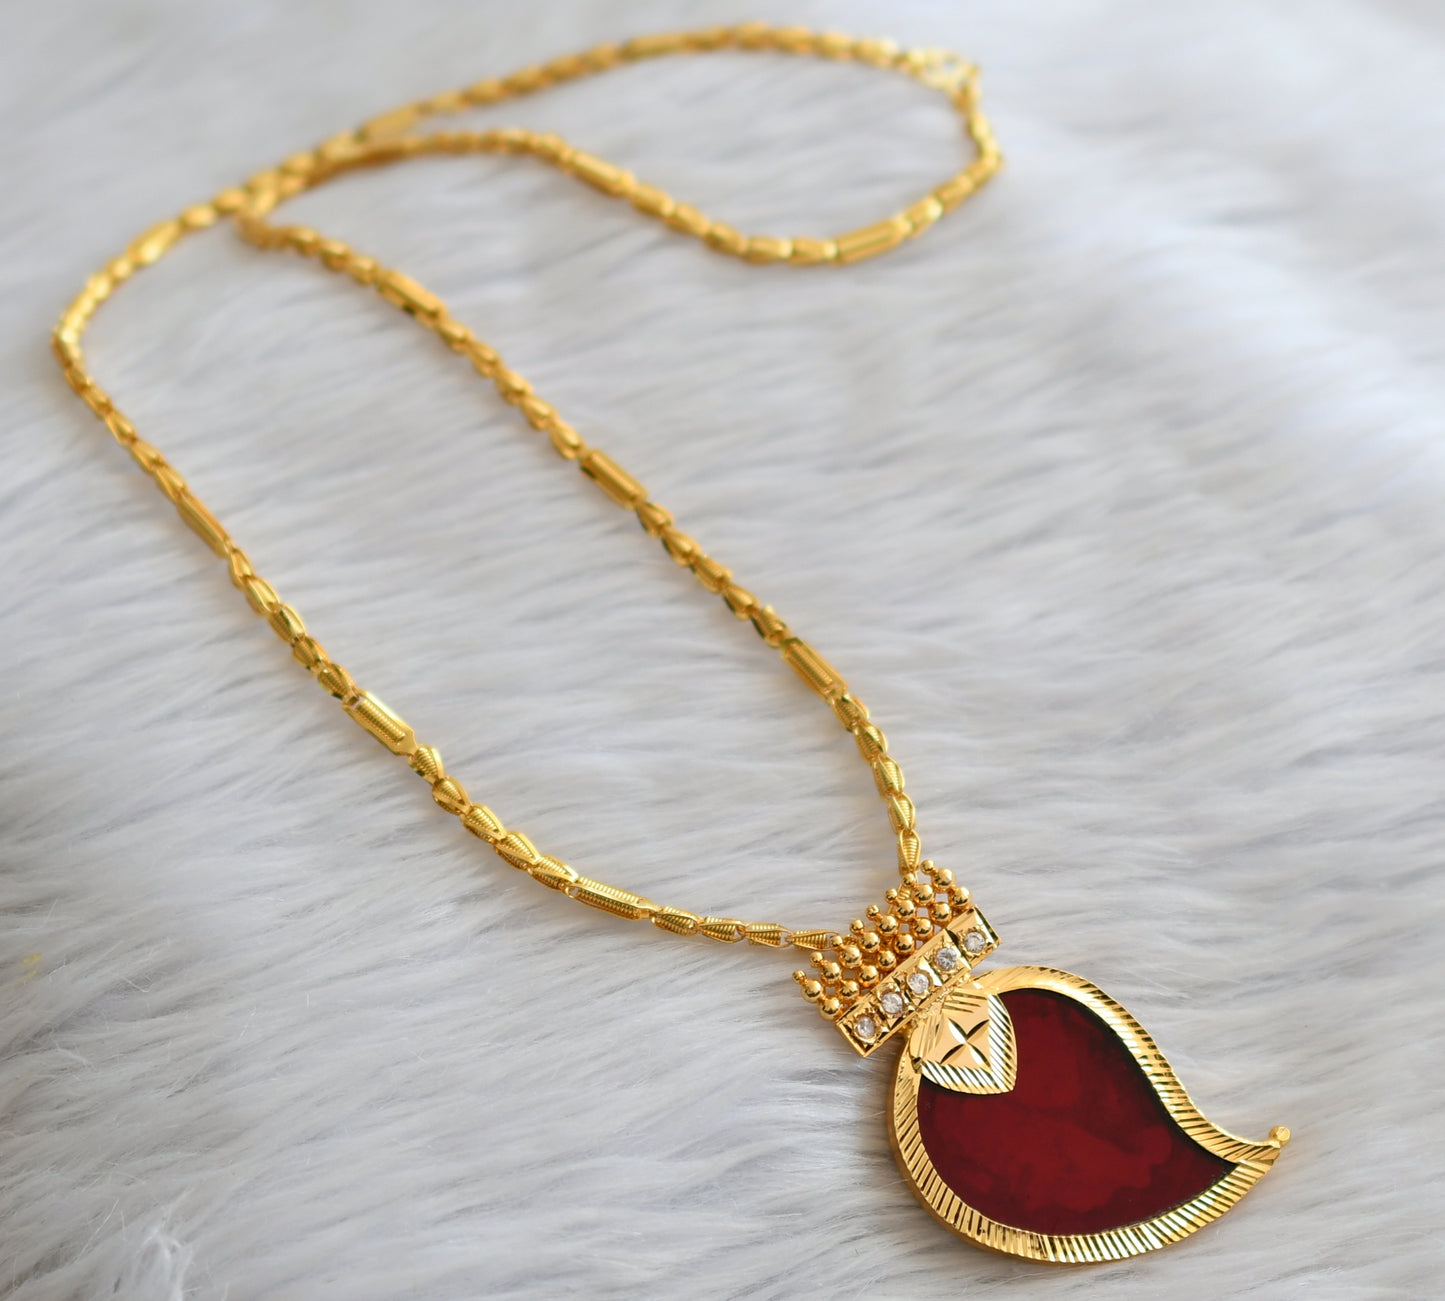 Gold tone kerala style 24 inches chain with red-white mango pendant dj-45961